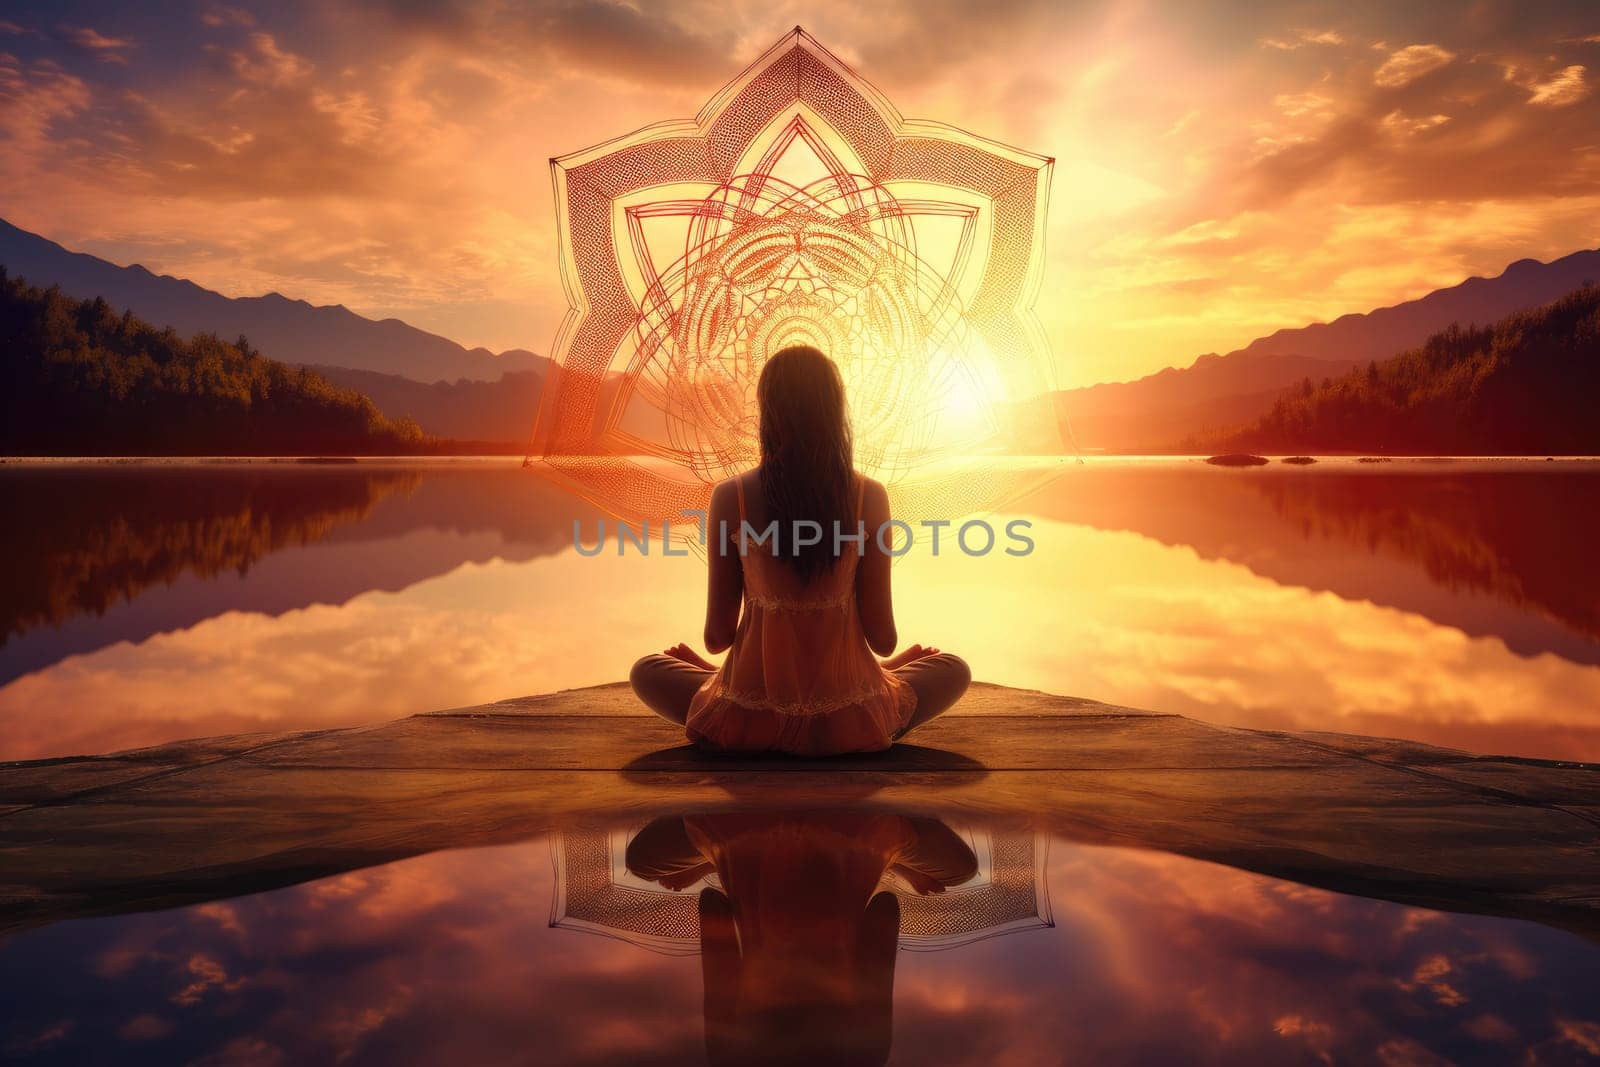 Mindful Sunset Meditation in Nature's Beauty - Yoga Stock Photo by Yurich32